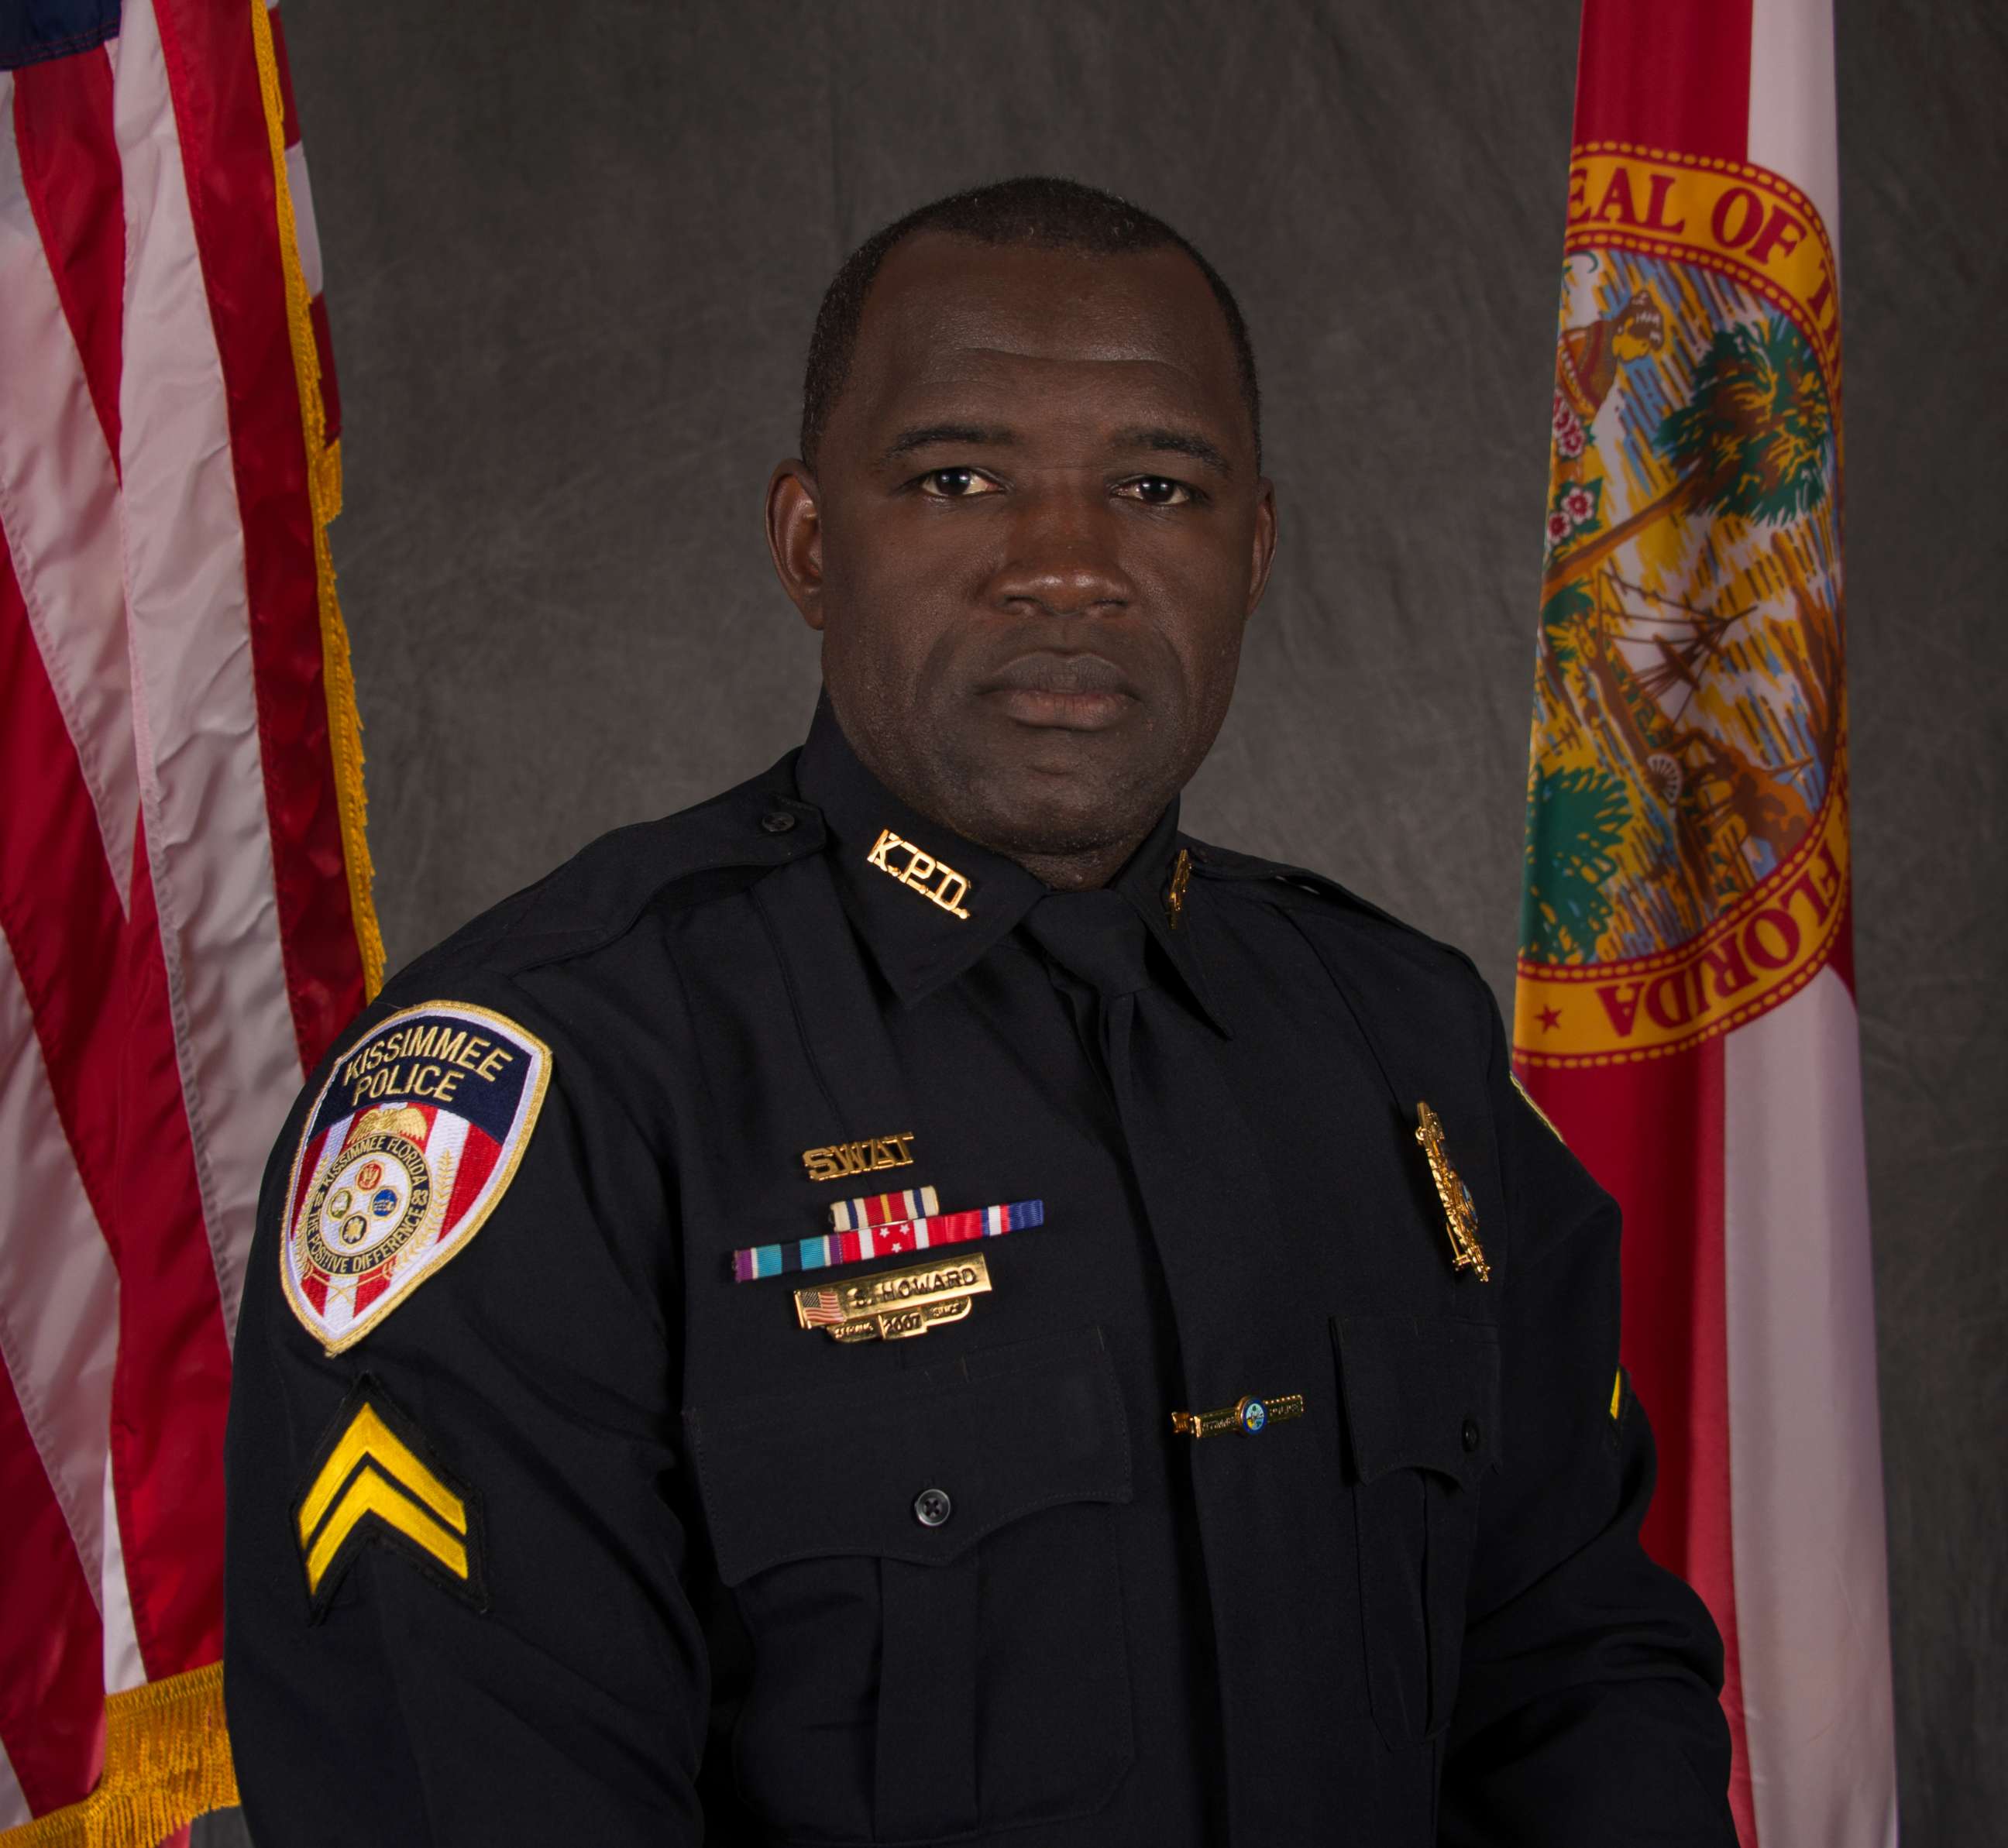 PHOTO: Sgt. Sam Howard, a 10-year veteran of the Kissimmee Police Department, was in "grave critical condition” after he was shot on Friday August 19, 2017.